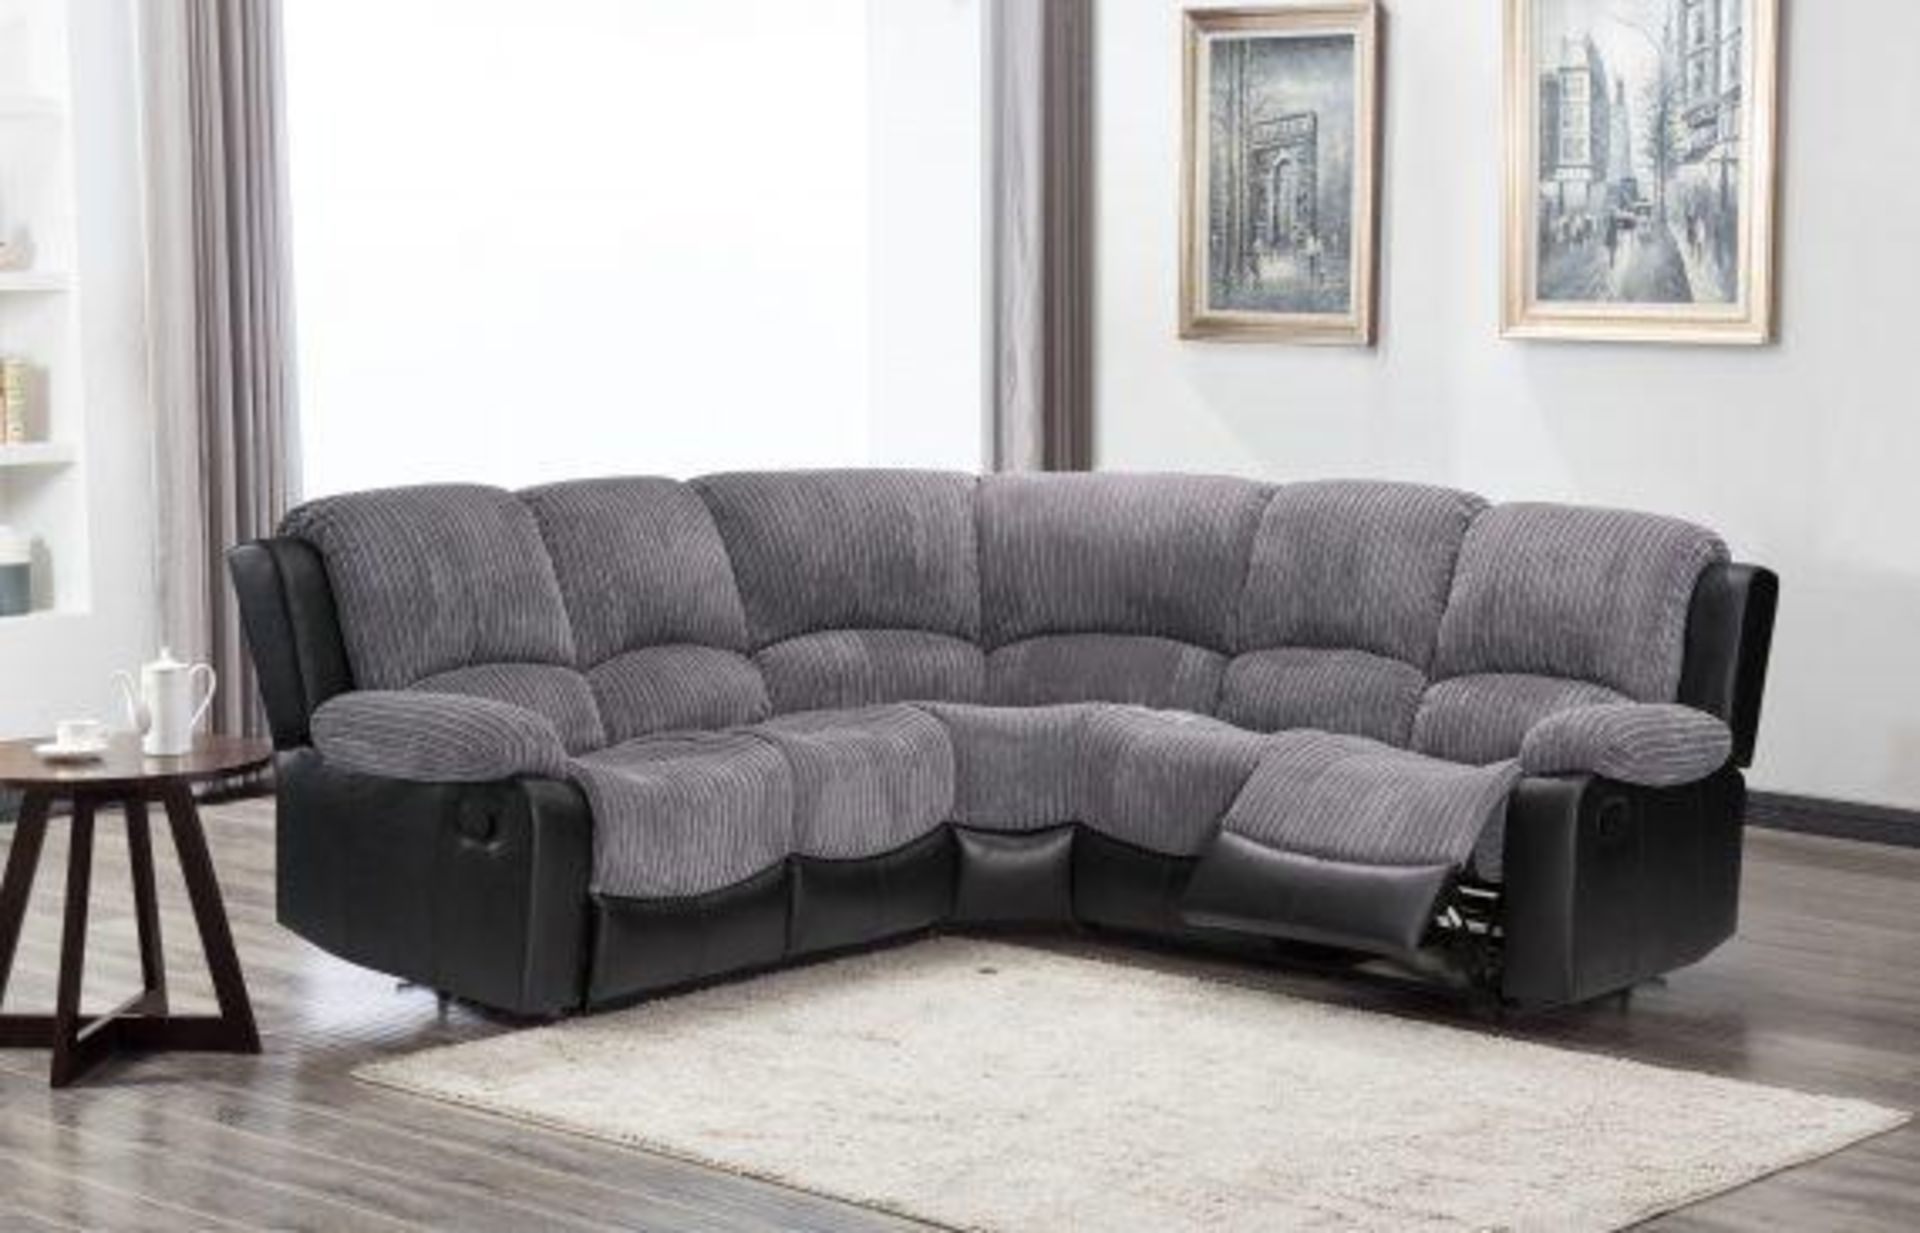 BRAND NEW & BOXED California corner sofa in grey with black leather trim RRP: £1,399.00